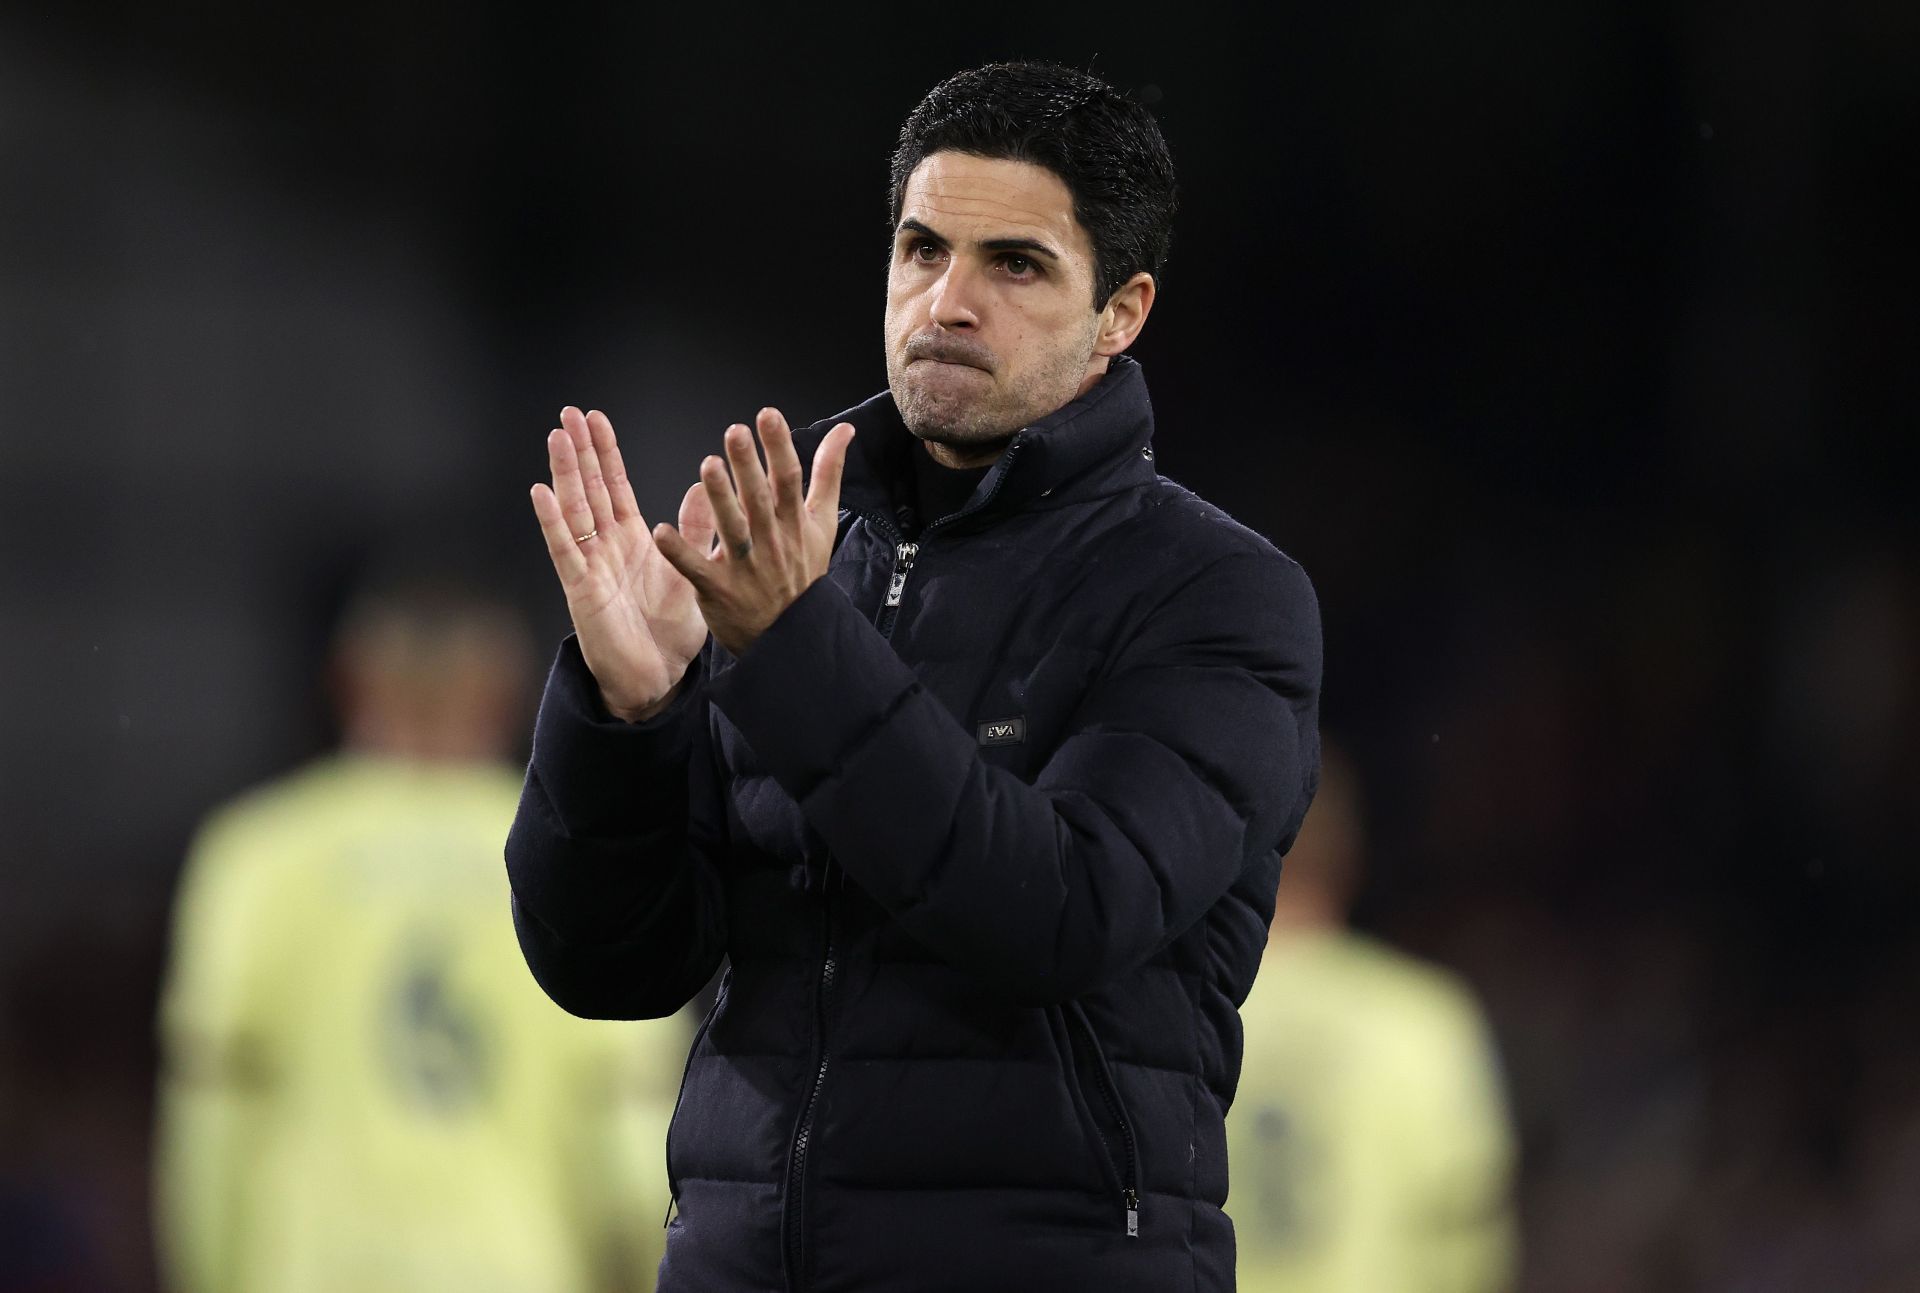 Arsenal manager Mikel Arteta is looking to upgrade his squad this summer.